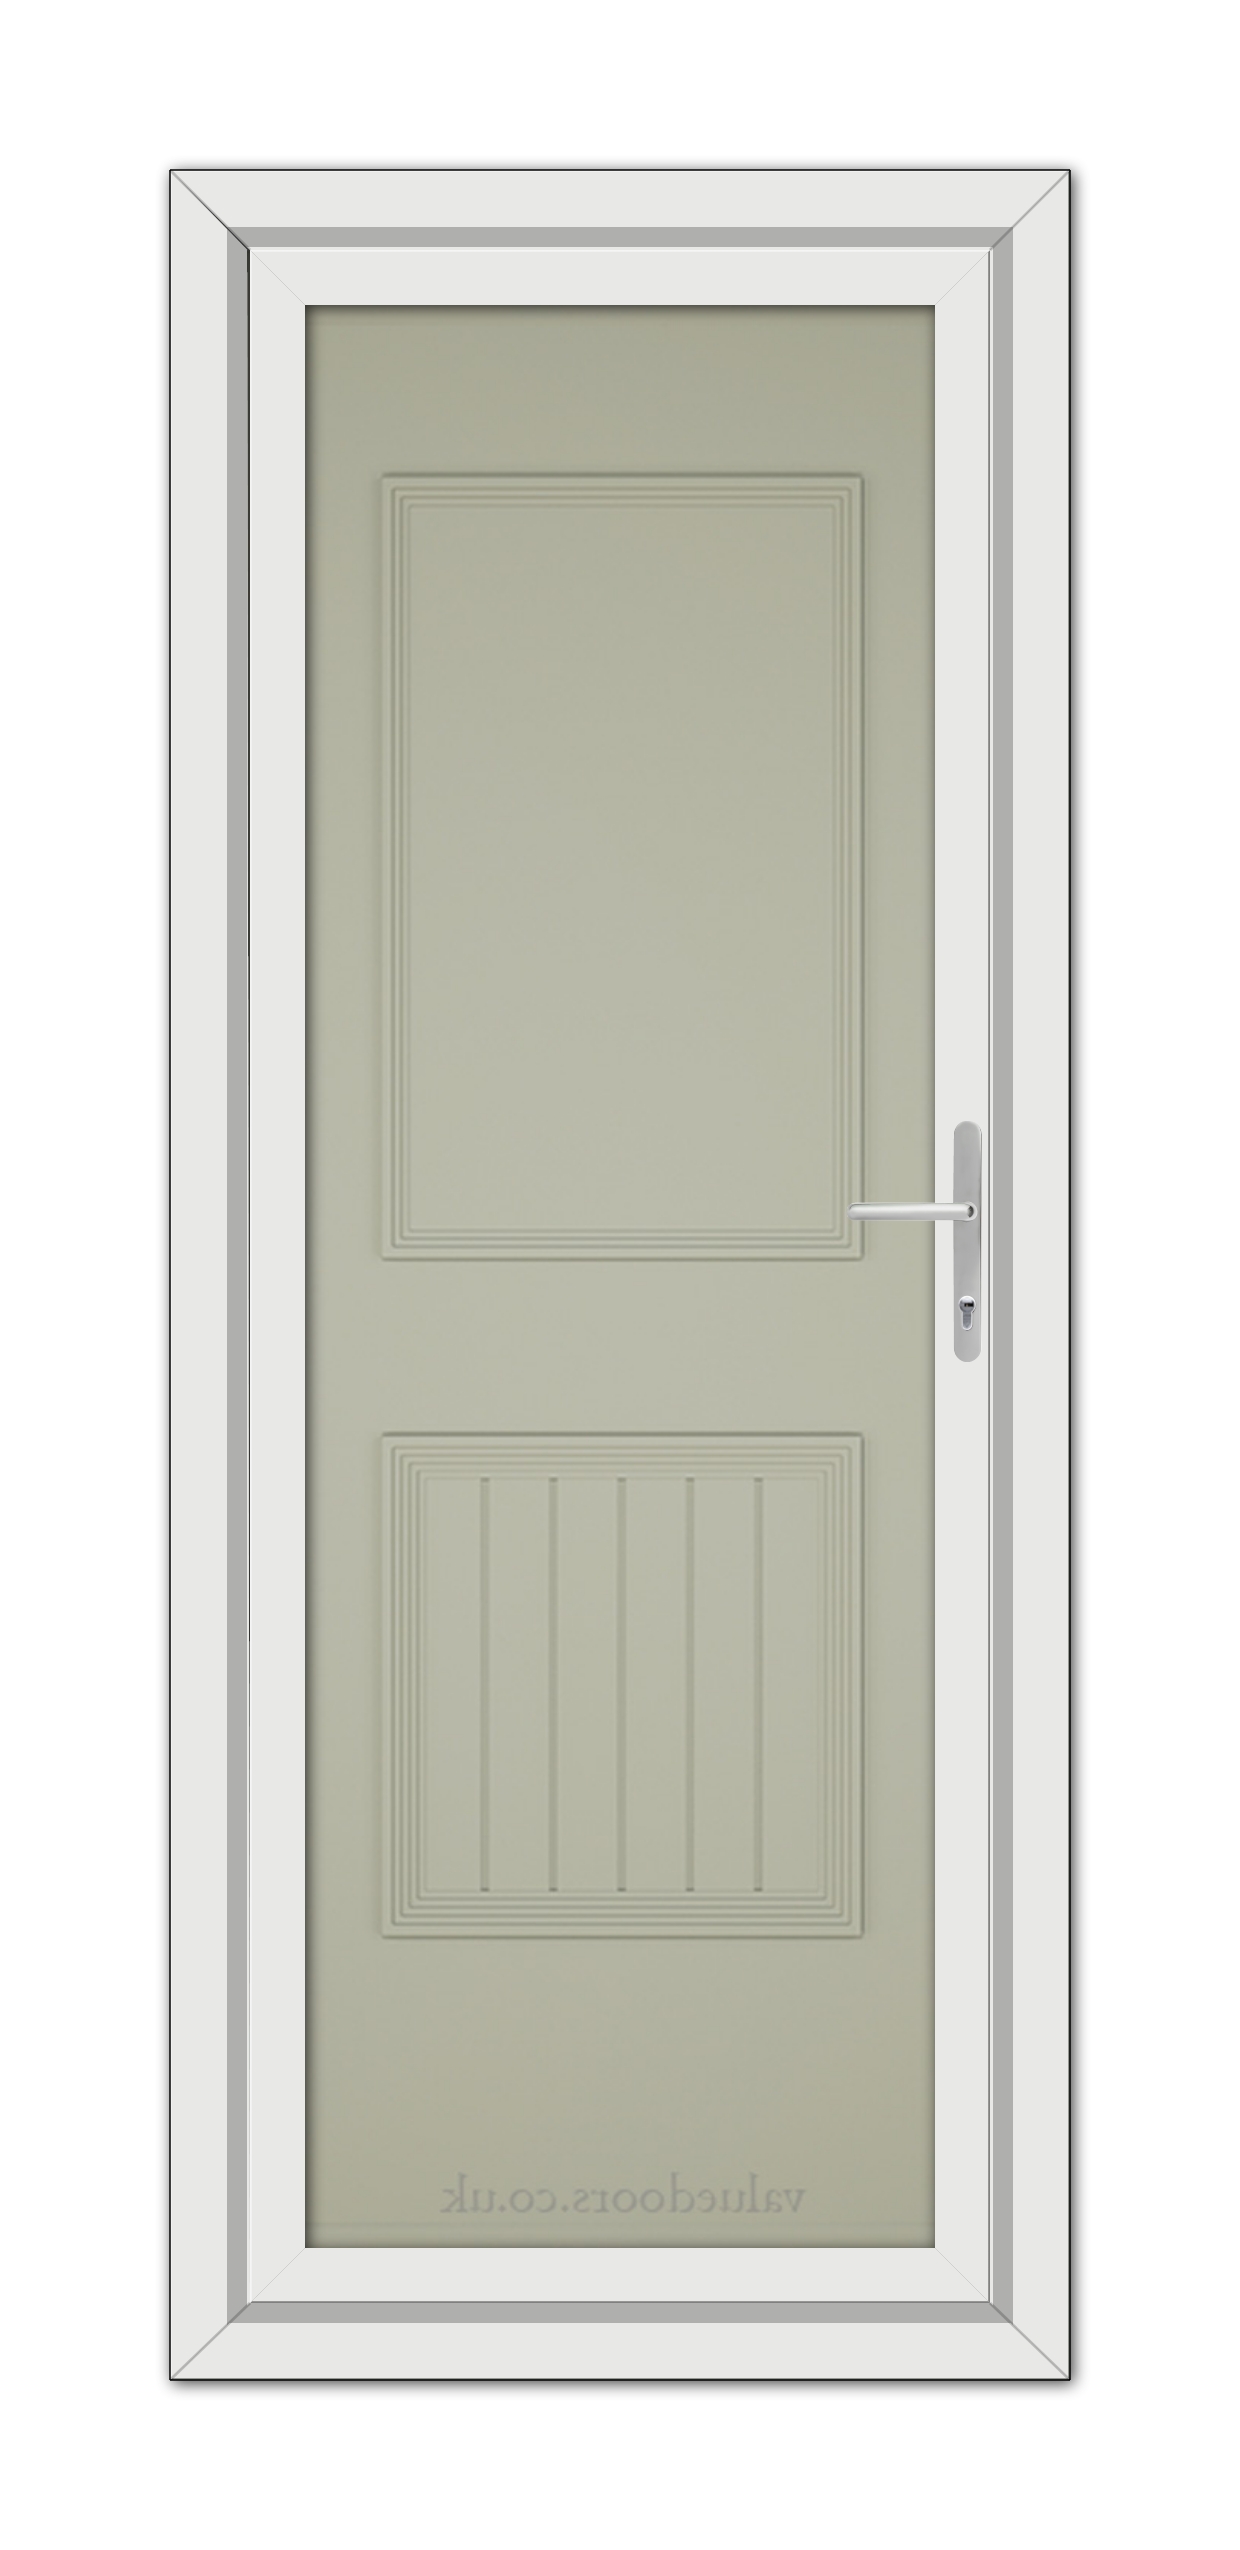 A Pebble Grey Alnwick One Solid uPVC door with a metallic handle, framed within a white door frame, viewed from the front.